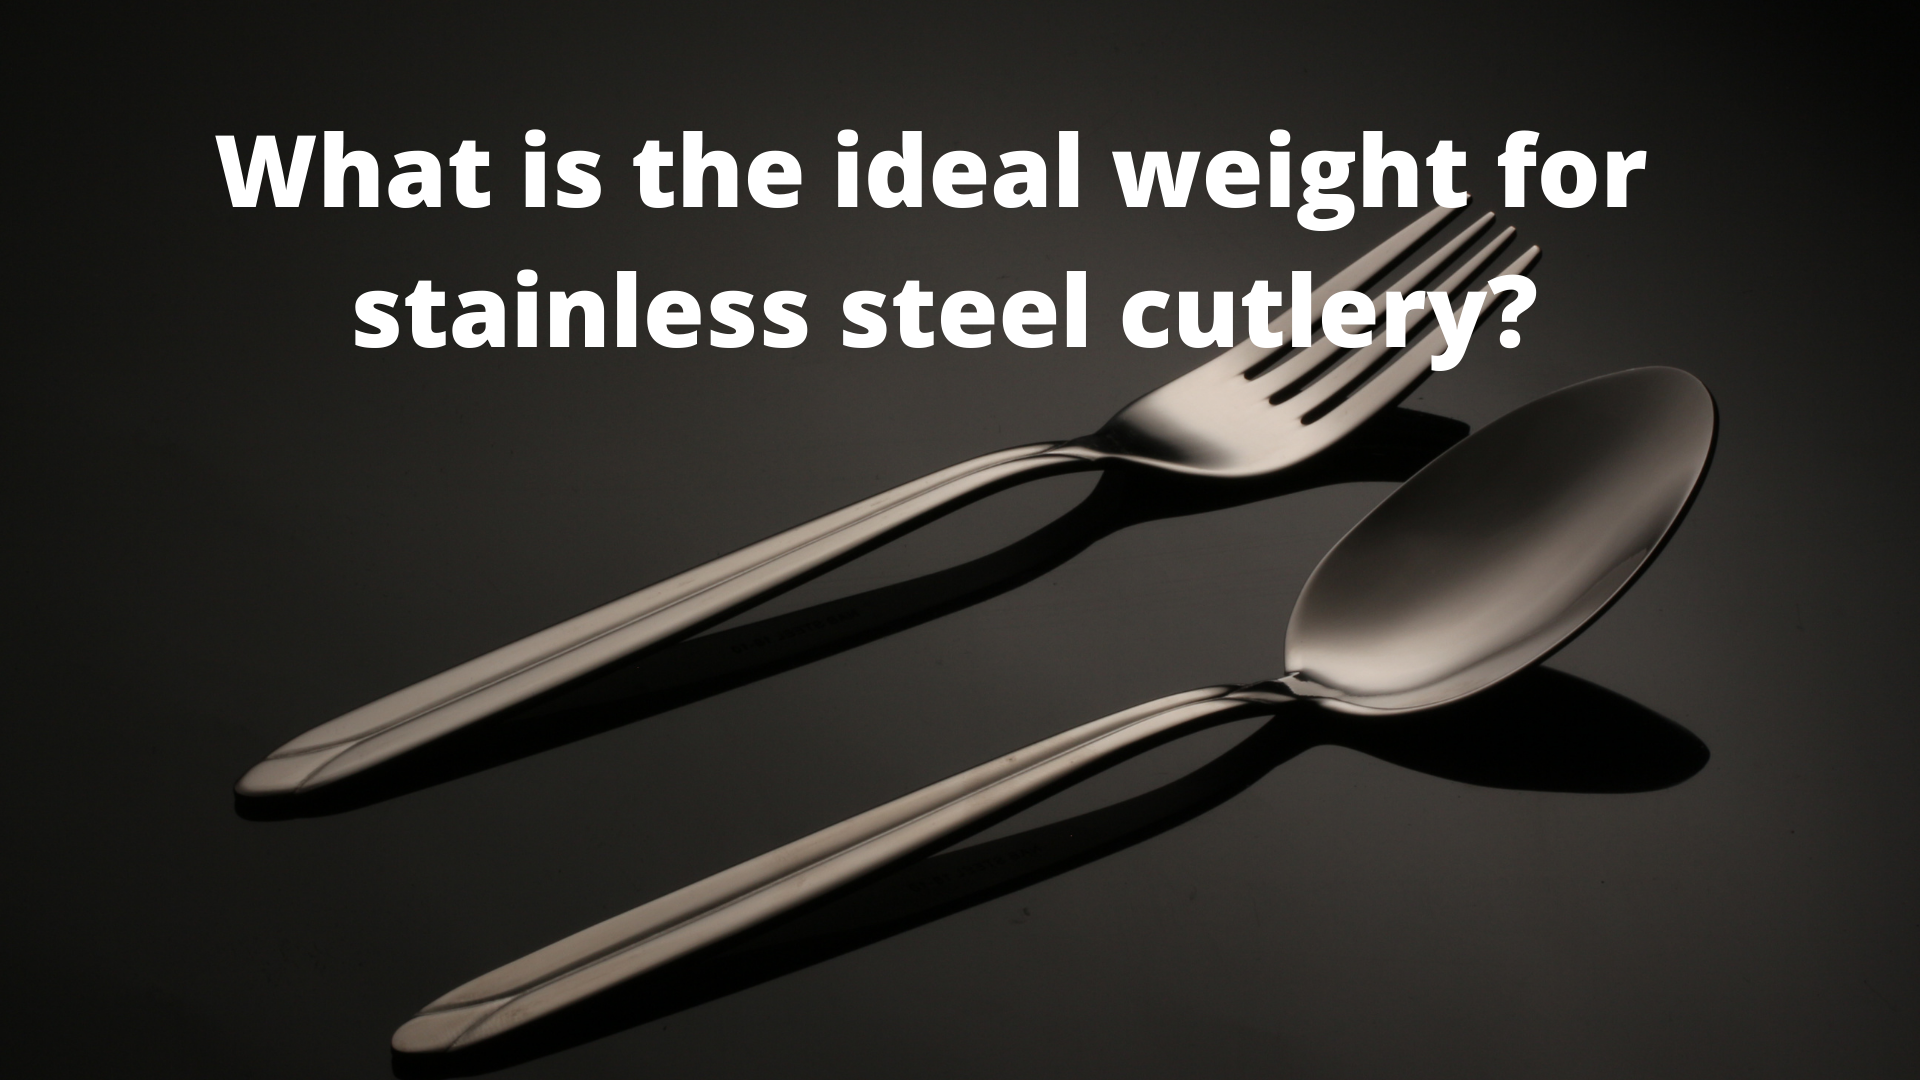 What is the ideal weight for stainless steel cutlery?